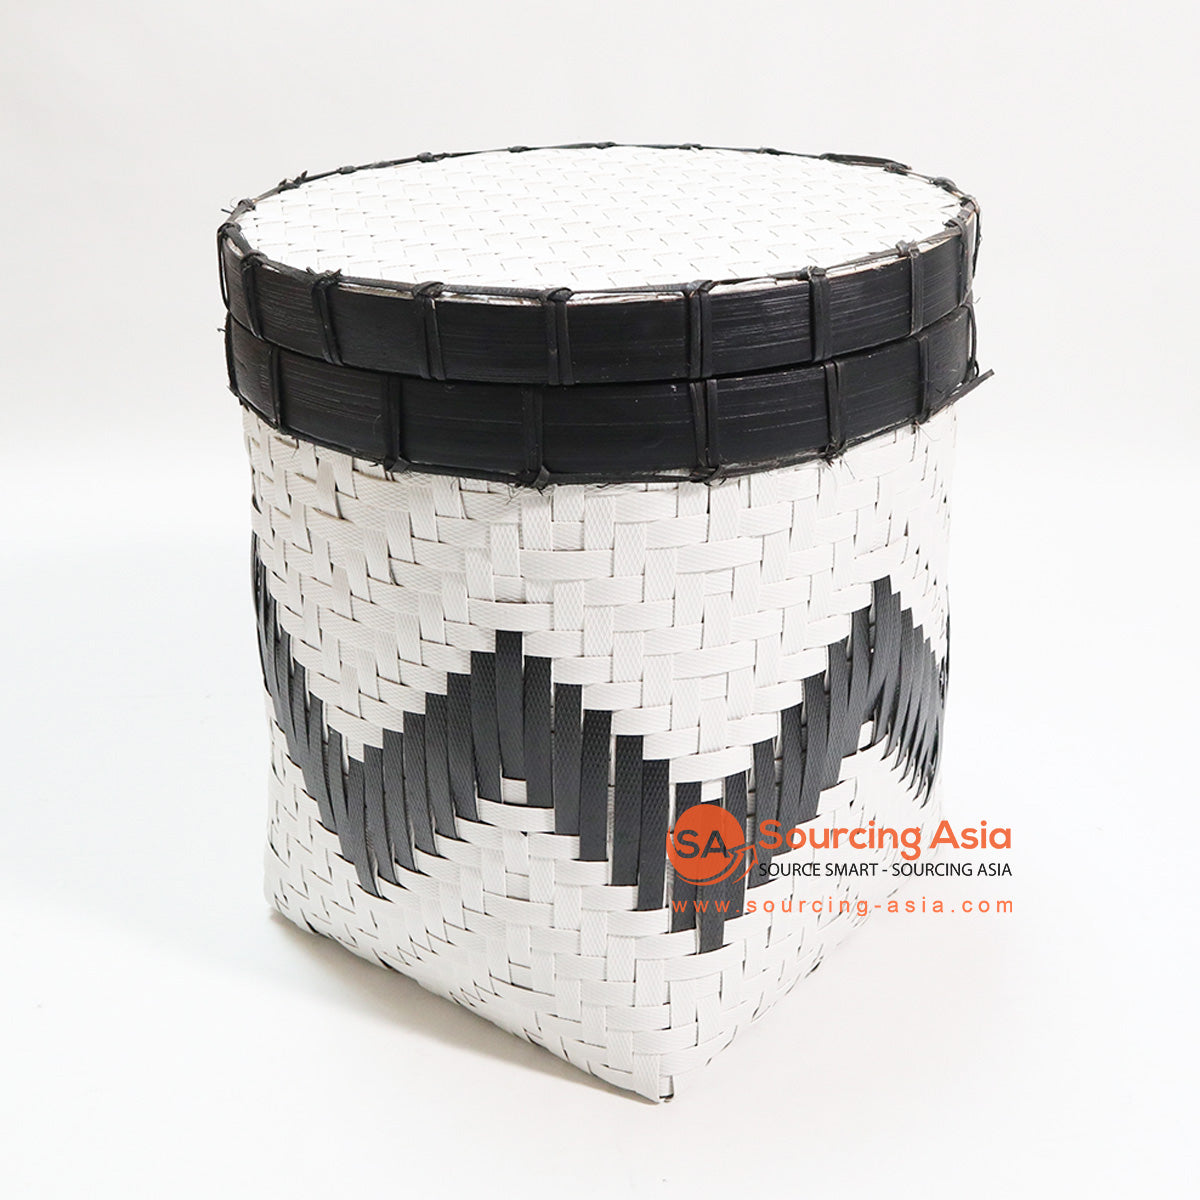 HBSC100 BLACK AND WHITE WOVEN BAMBOO BASKET